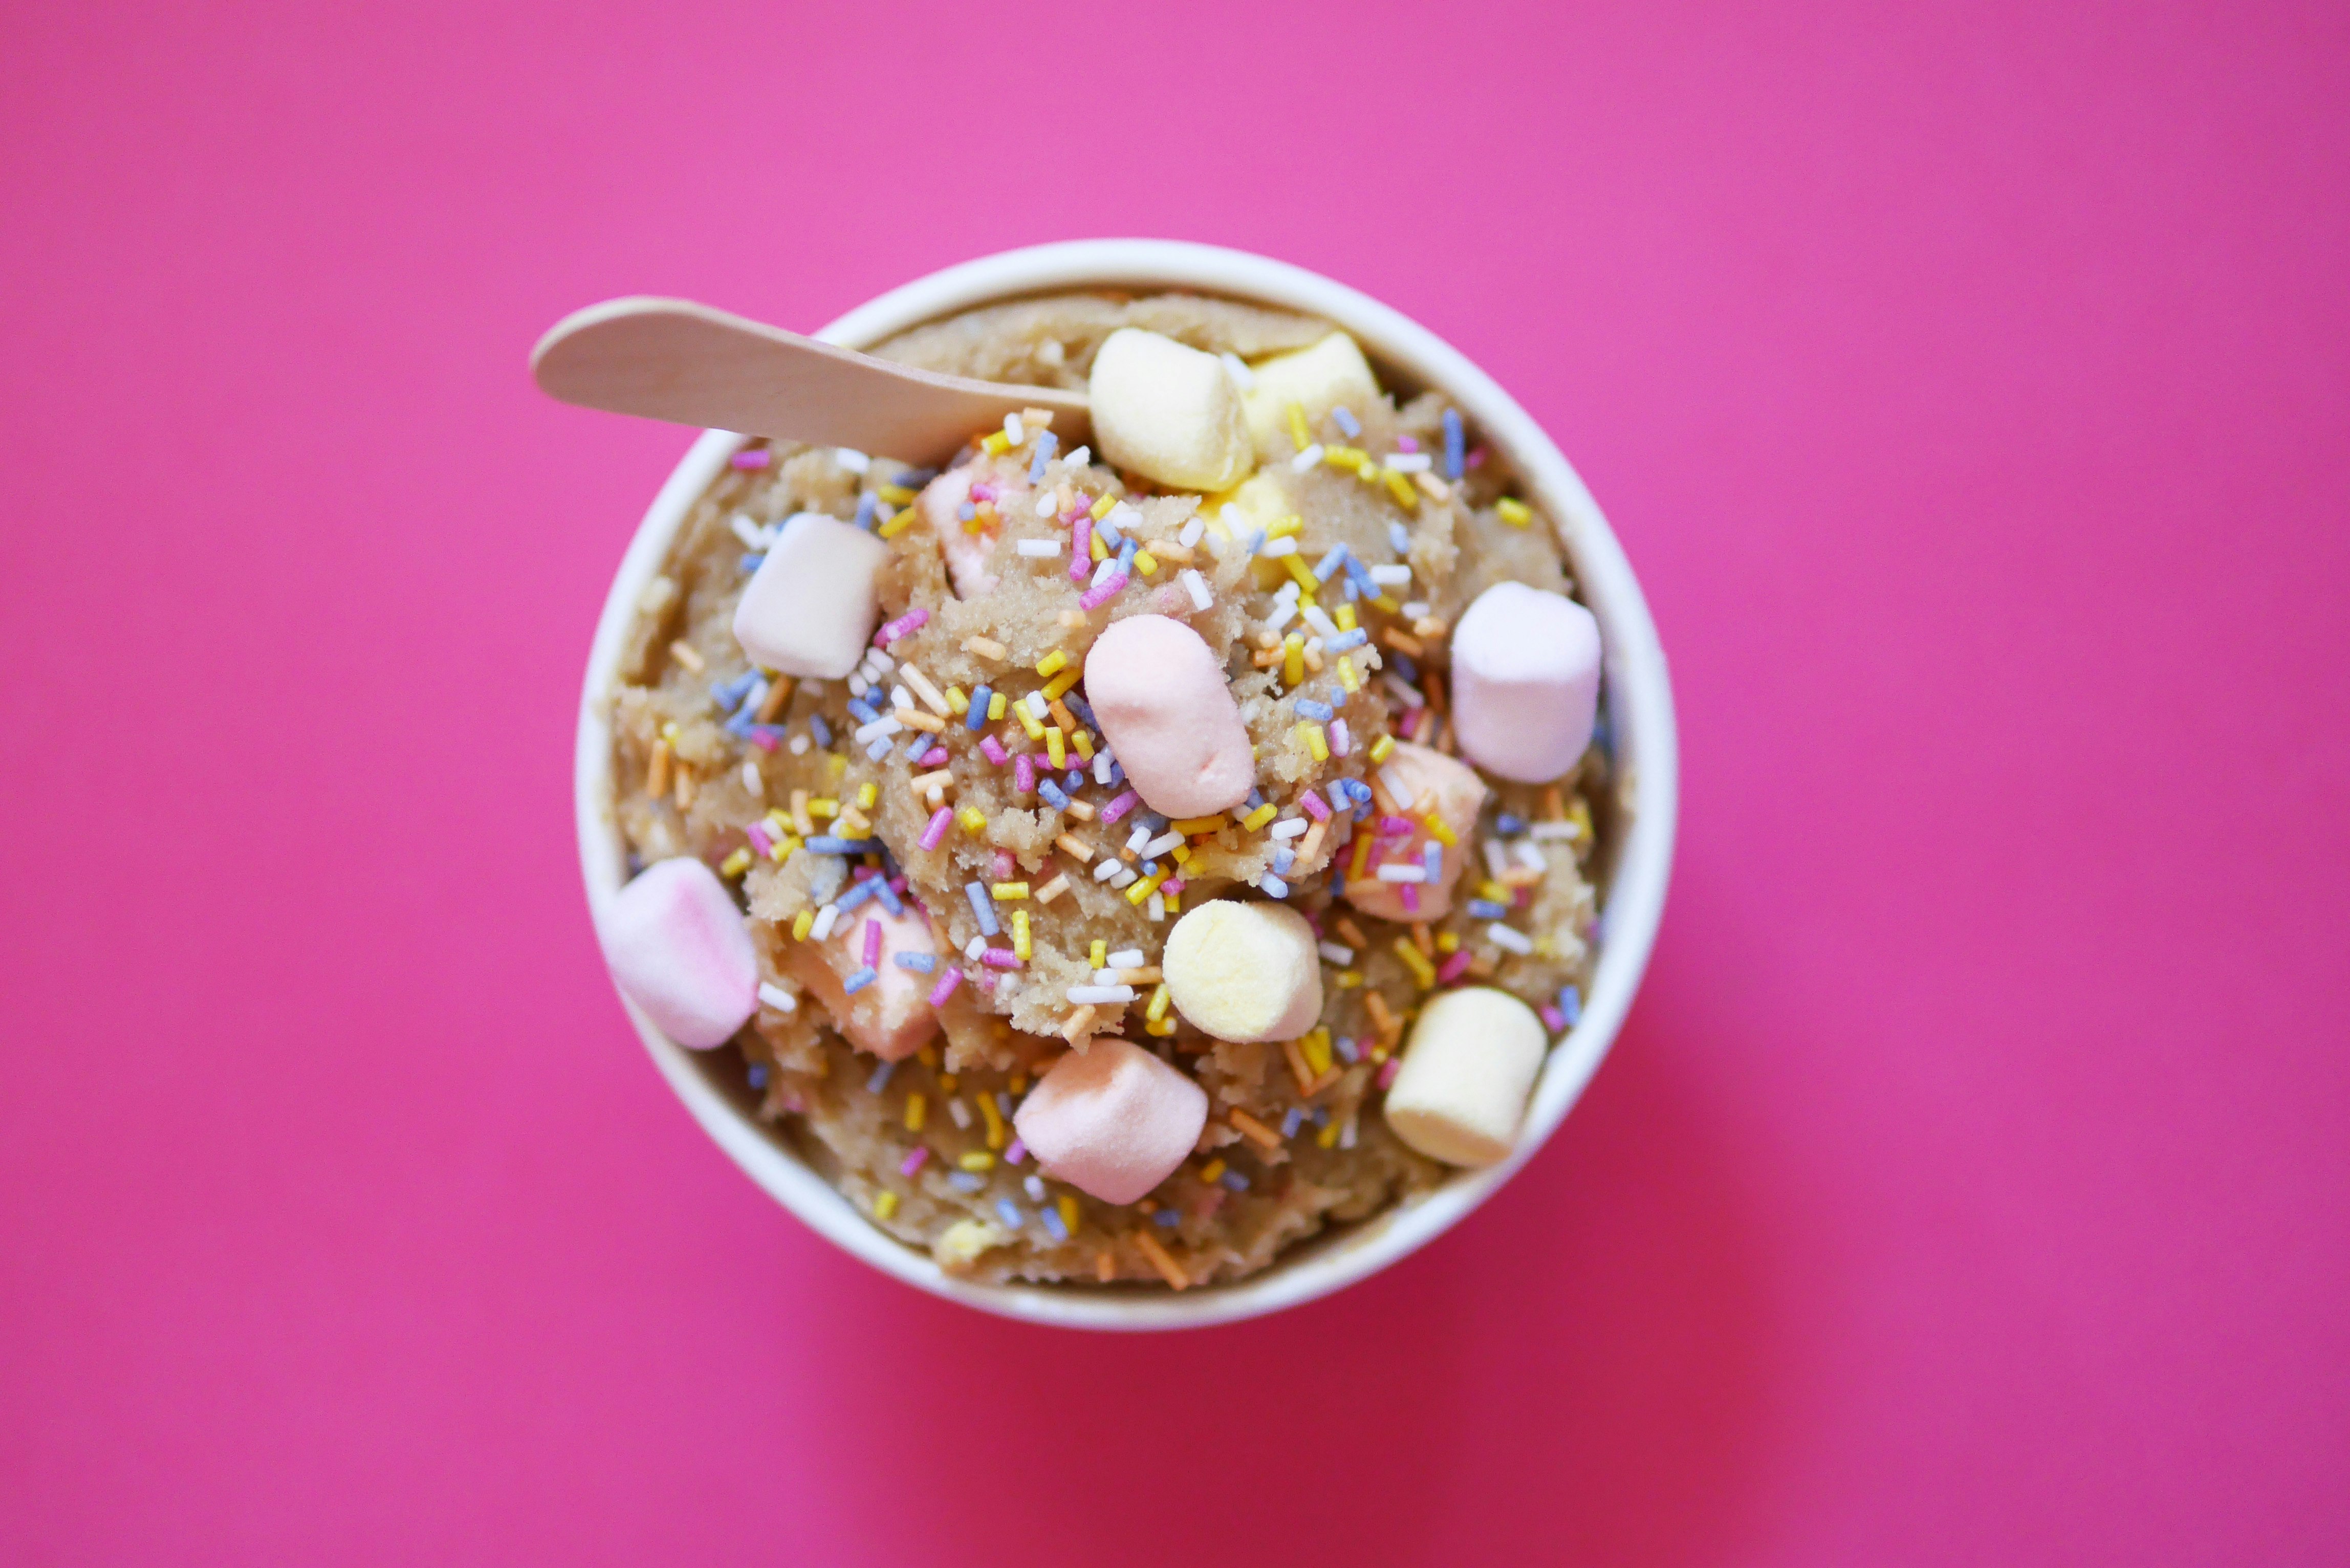 sprinkles and marshmallows on top of cookie dough made by naked dough, London's first cookie dough pop-up